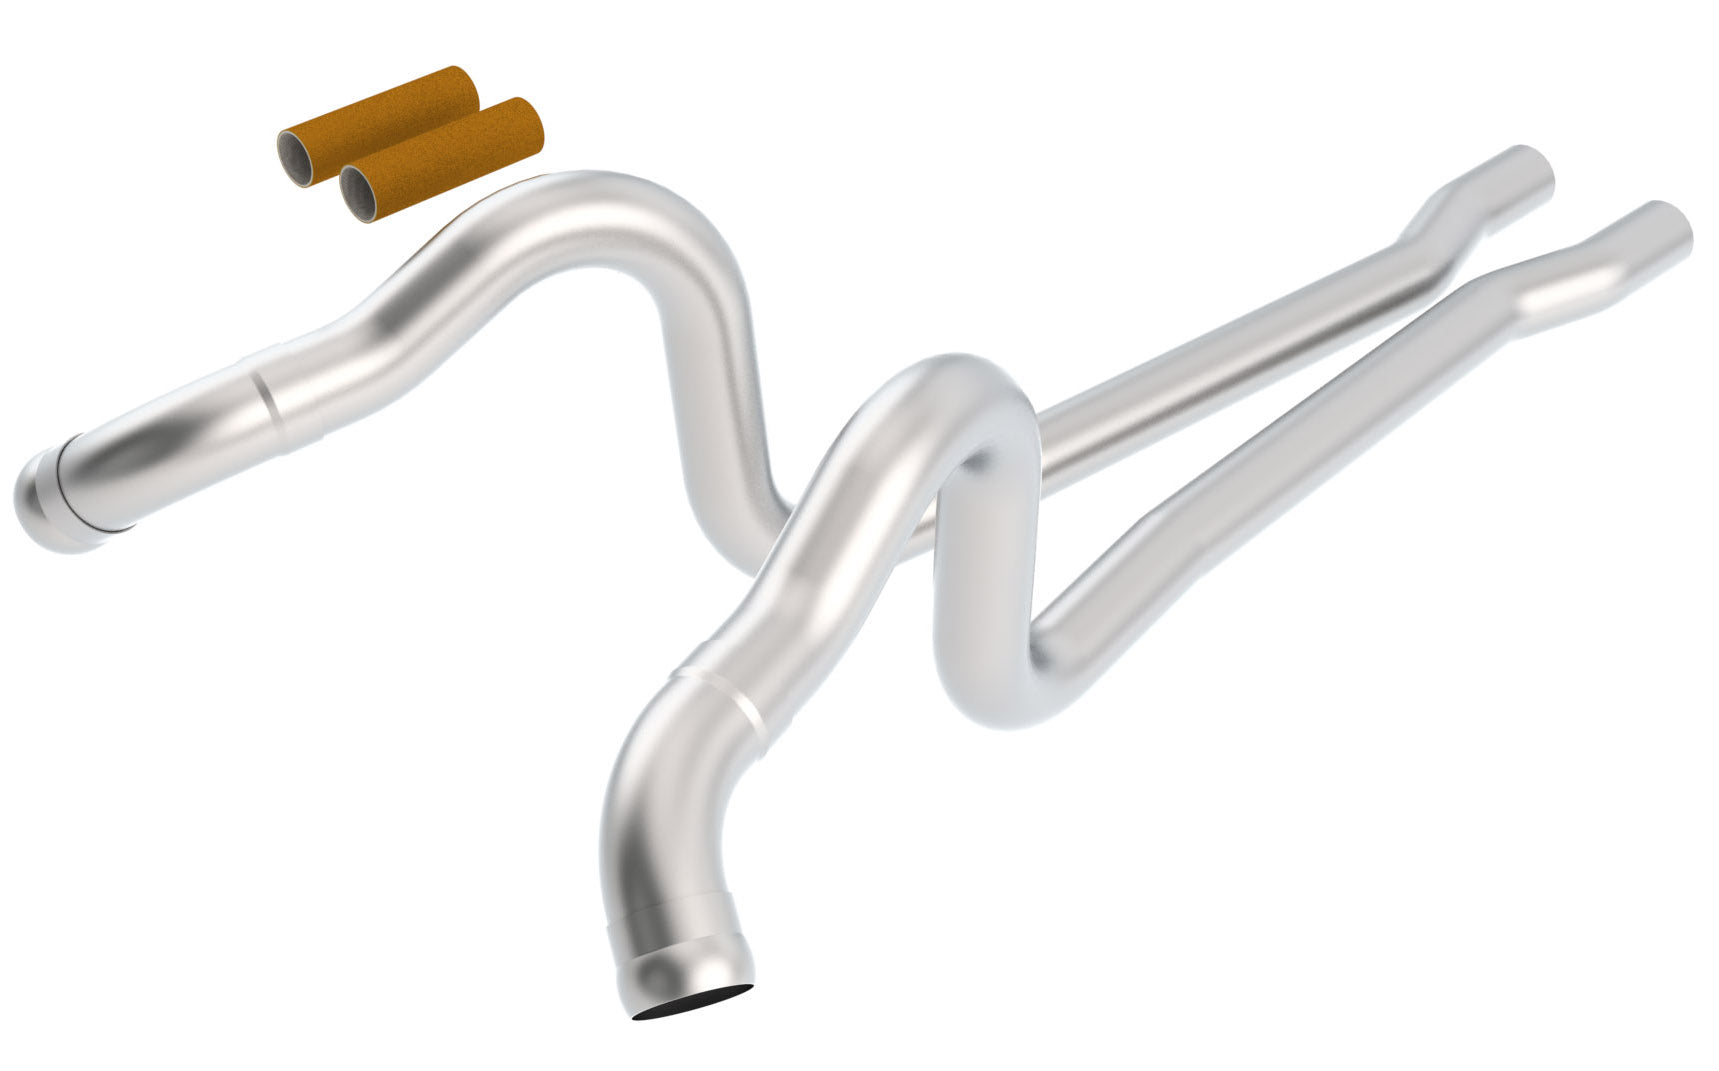 BORLA 60521 Exhaust System X-Pipes, Mid-Pipes, & Down-Pipes MUST 11- 12 OVER AXLE PIPES Photo-0 